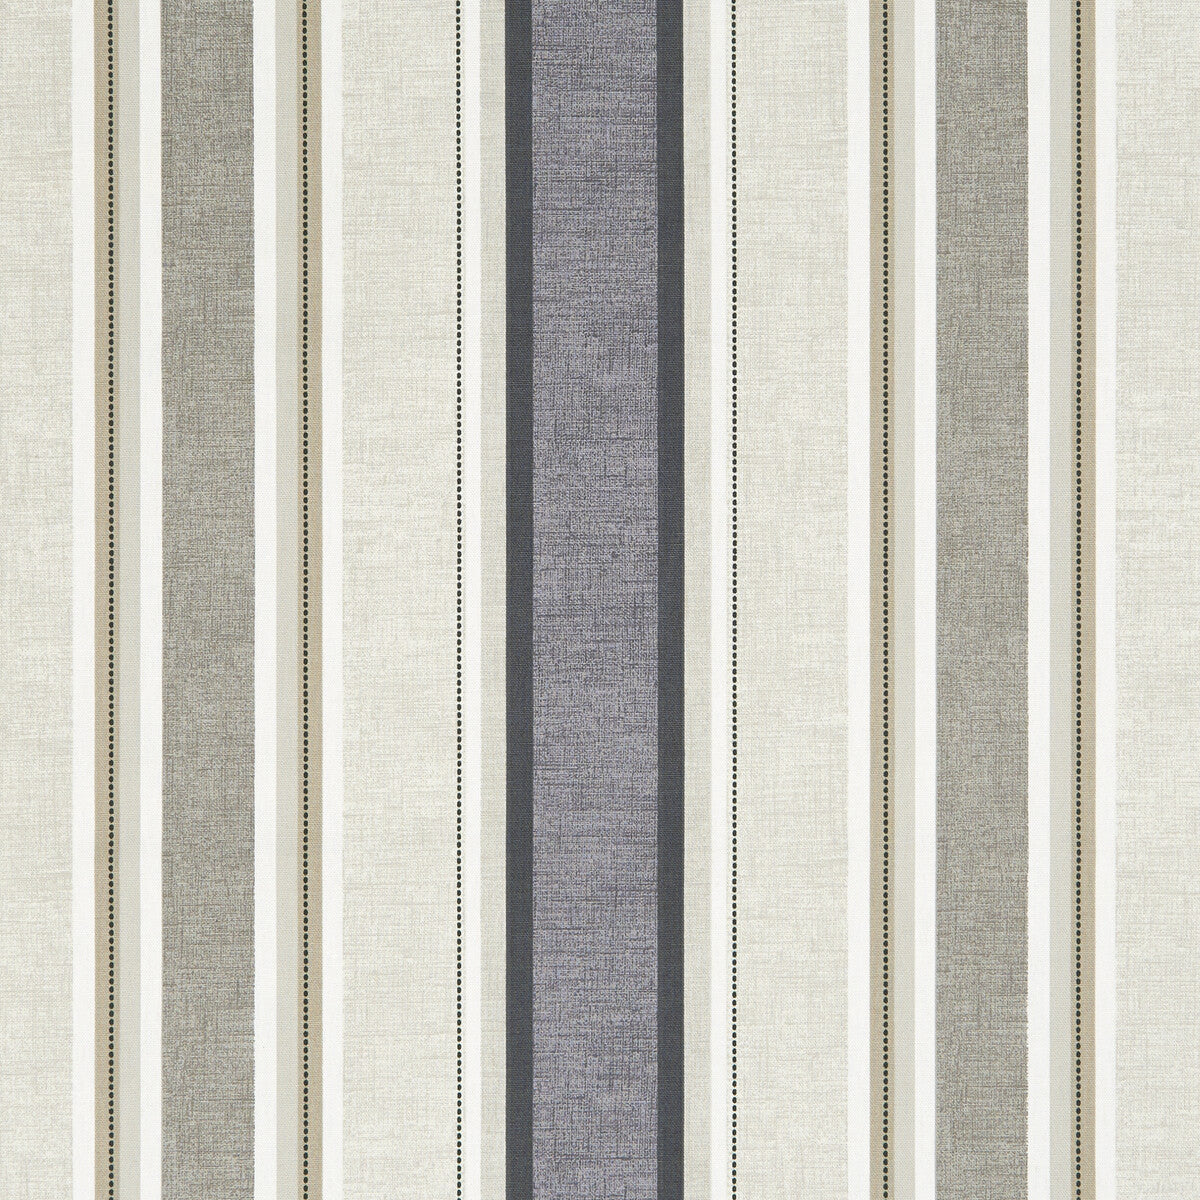 Luella fabric in natural color - pattern F1065/04.CAC.0 - by Clarke And Clarke in the Octavia By Studio G For C&amp;C collection